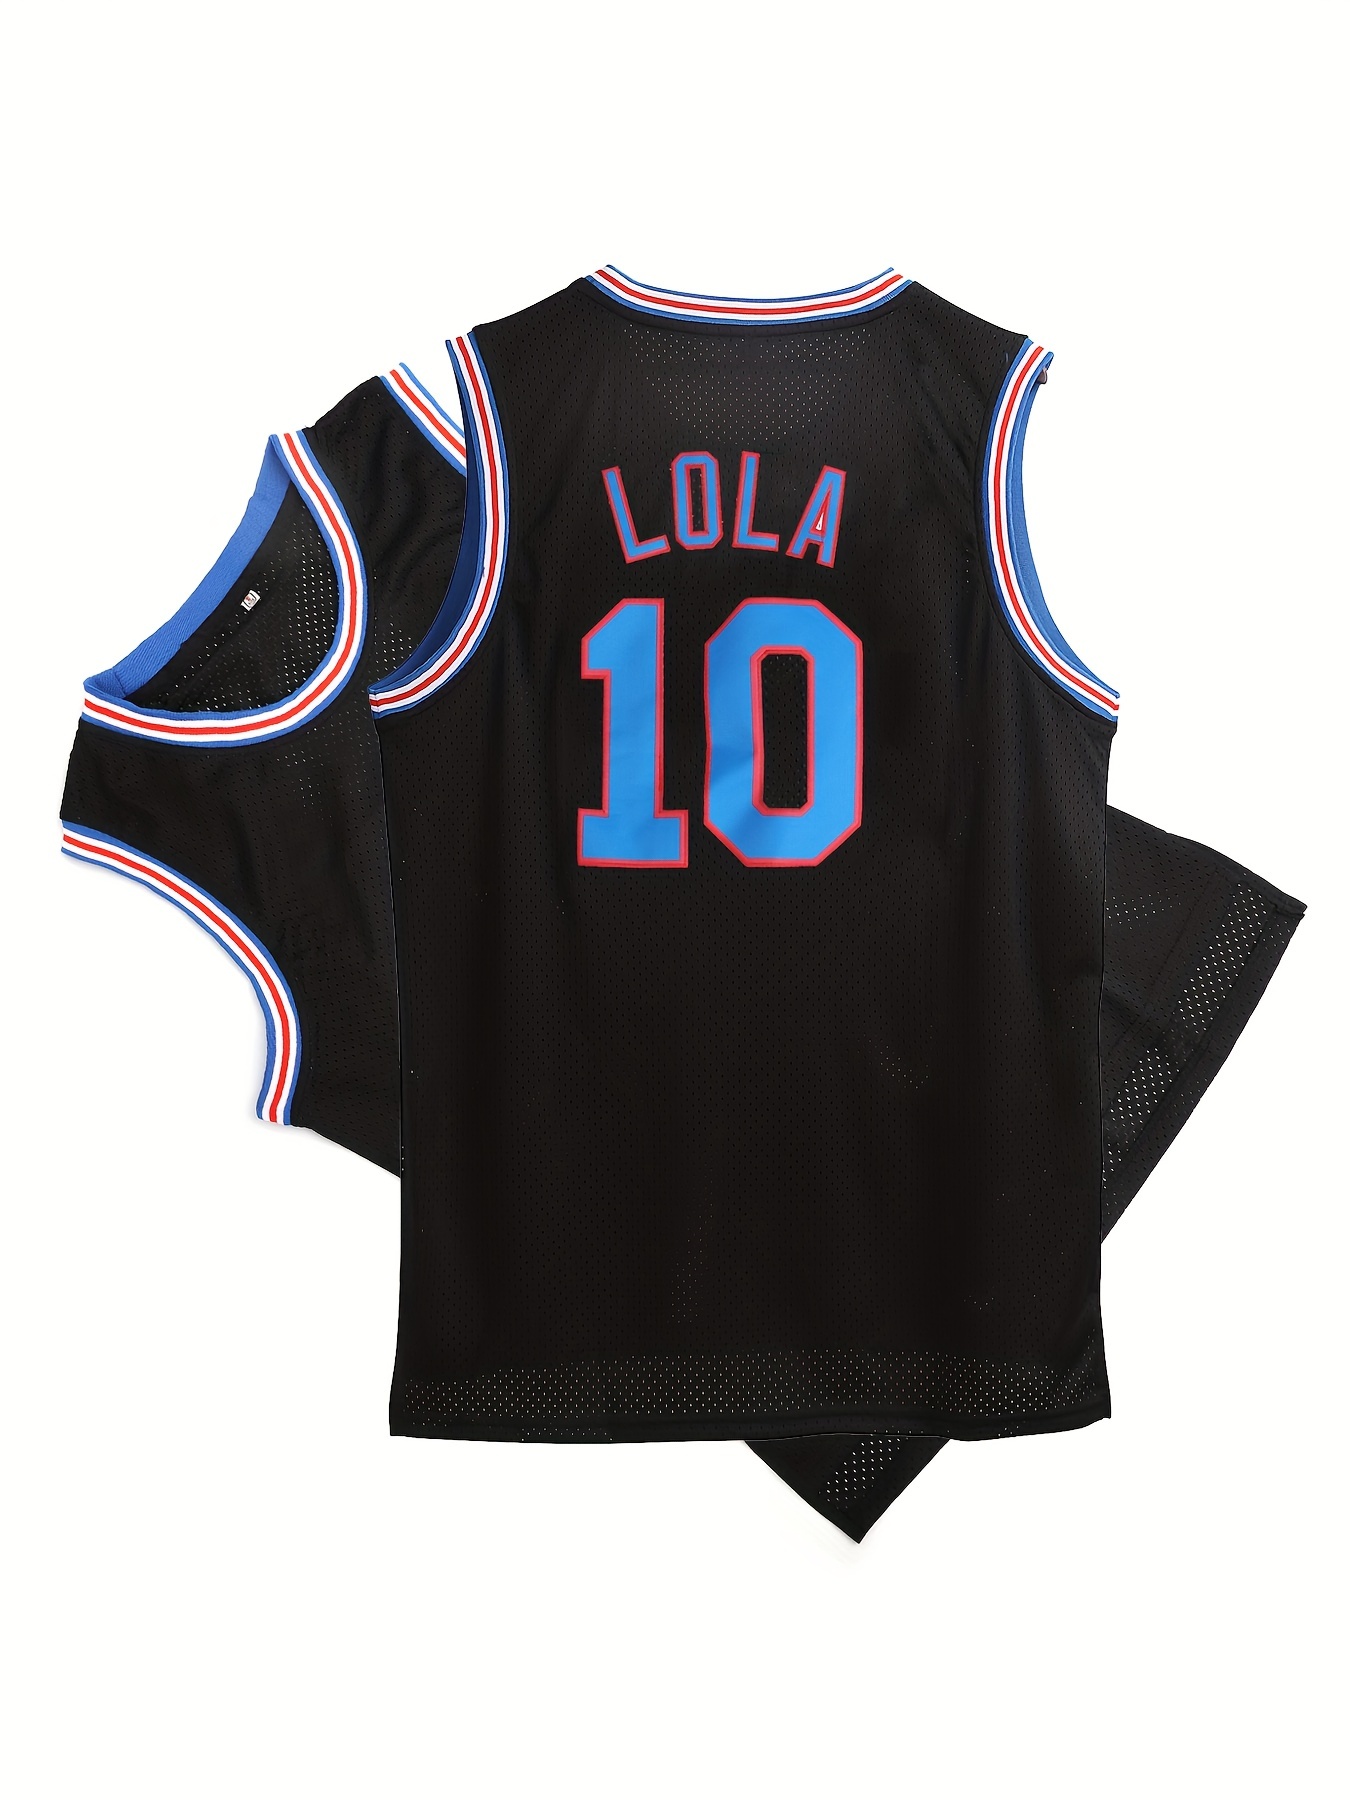  Youth Basketball Jerseys #10 Lola Space Shirts for Boys/Girls  90s Hiphop Party Clothing : Sports & Outdoors